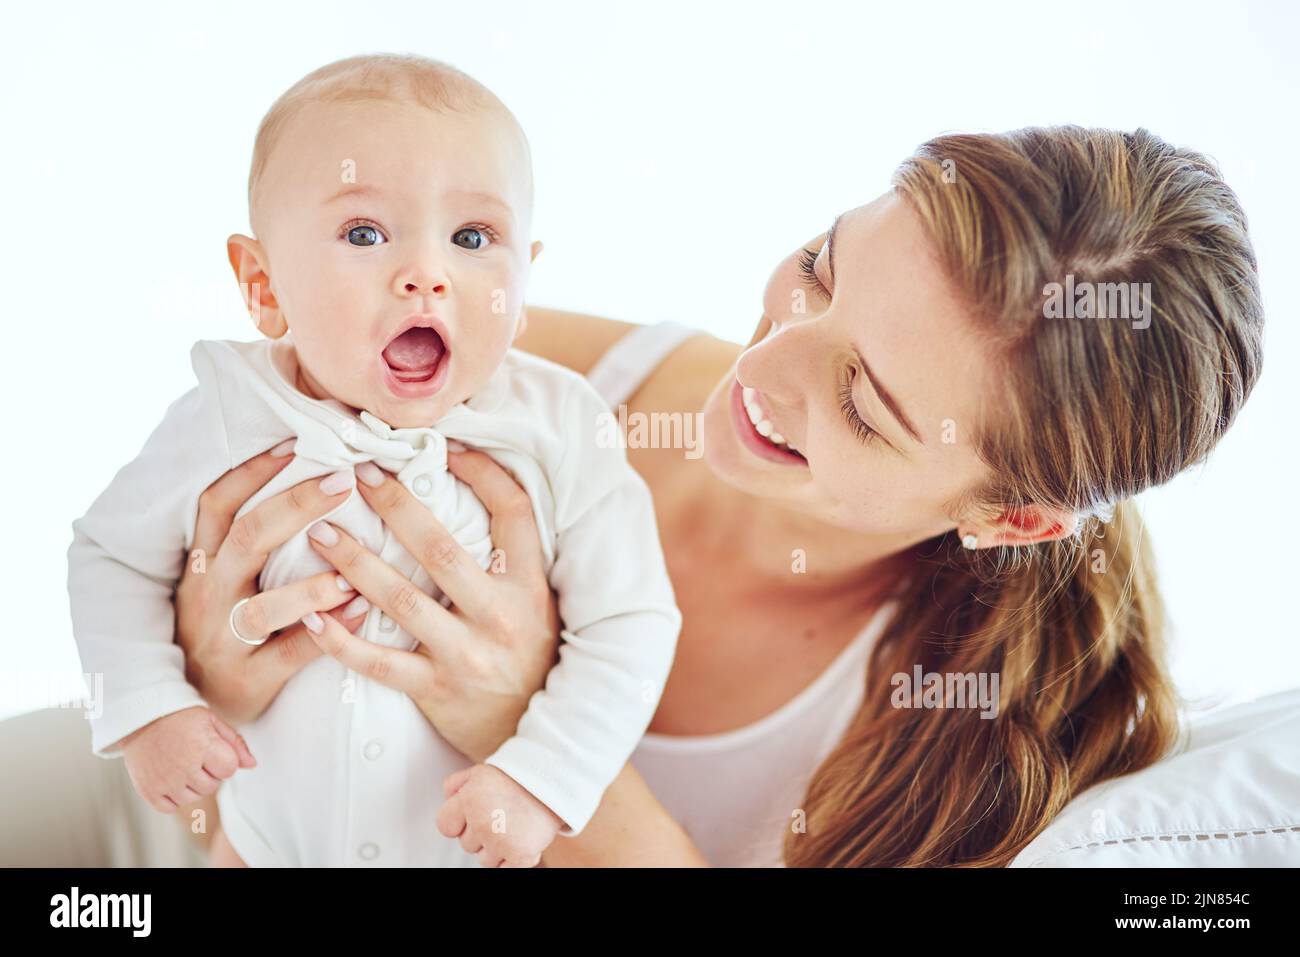 Happy, young and single mother bonding and taking care of adorable baby, enjoying parenthood and being a new mom. Happy female experiencing maternal Stock Photo